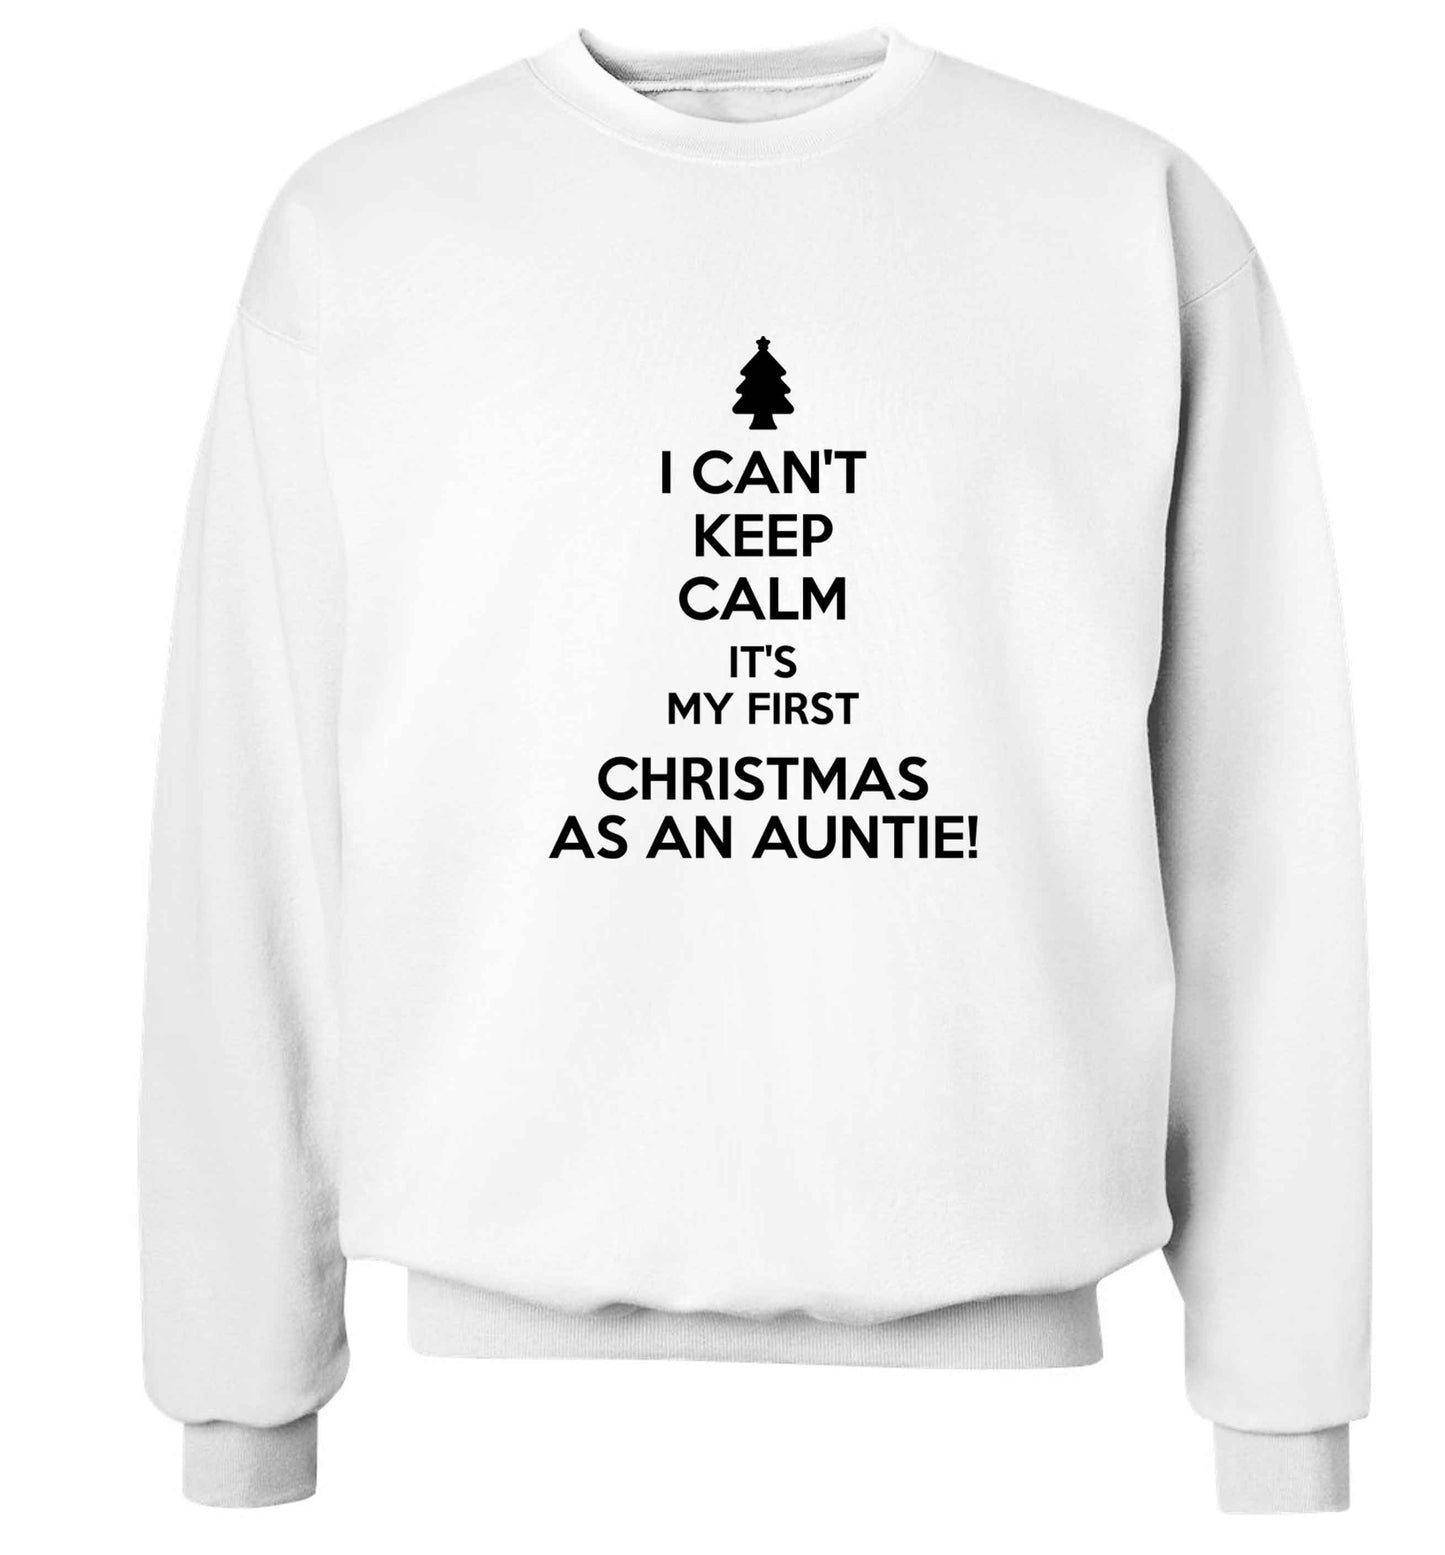 I can't keep calm it's my first Christmas as an auntie! Adult's unisex white Sweater 2XL